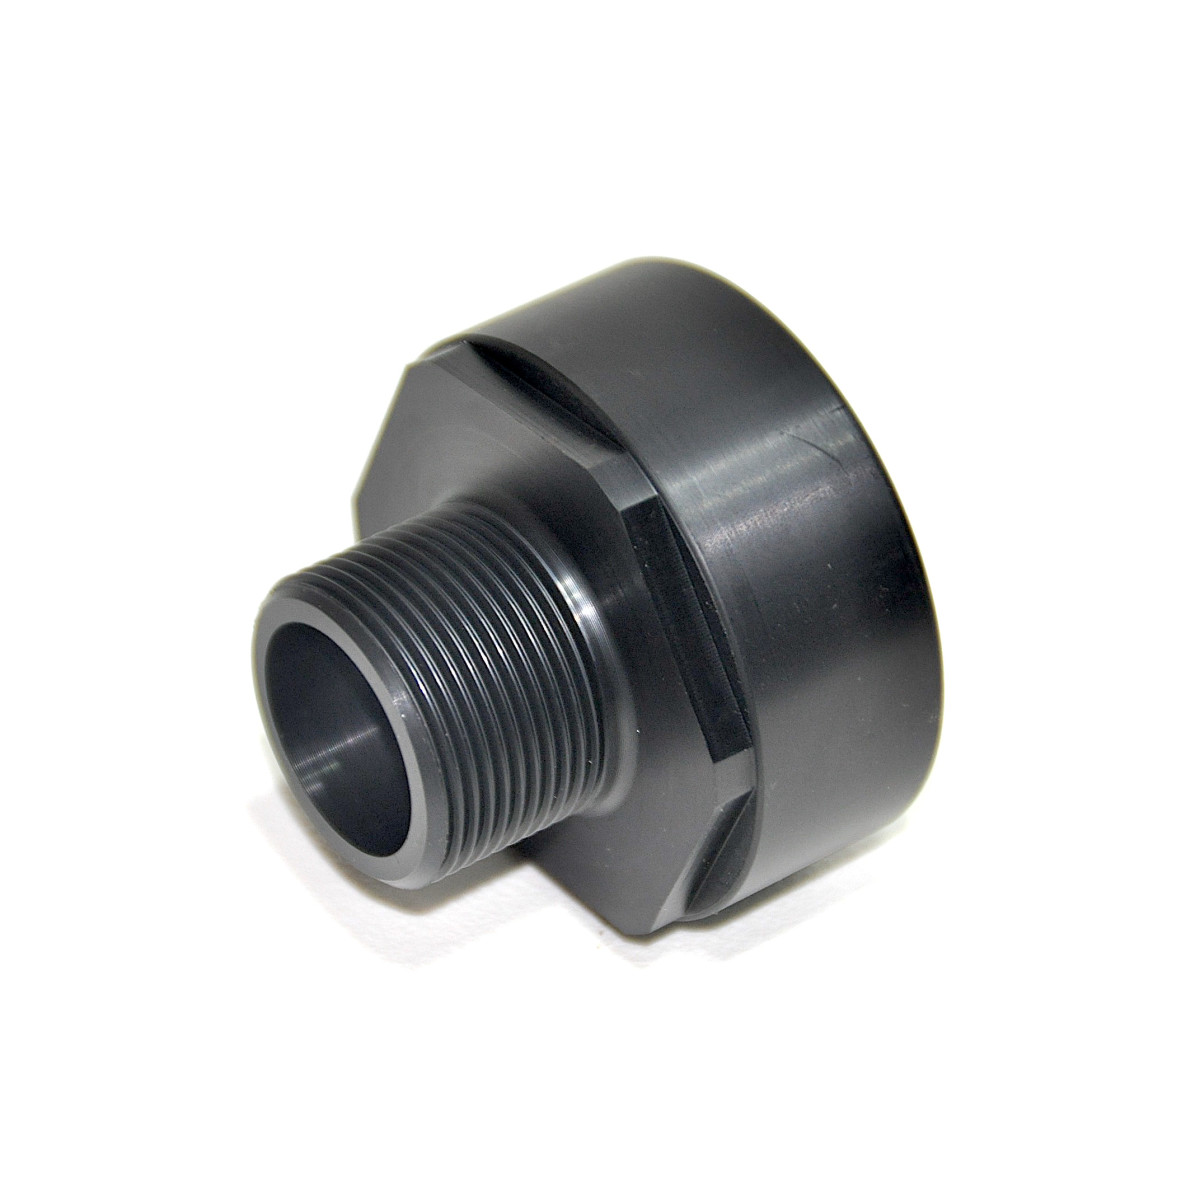 Adapters with Male thread